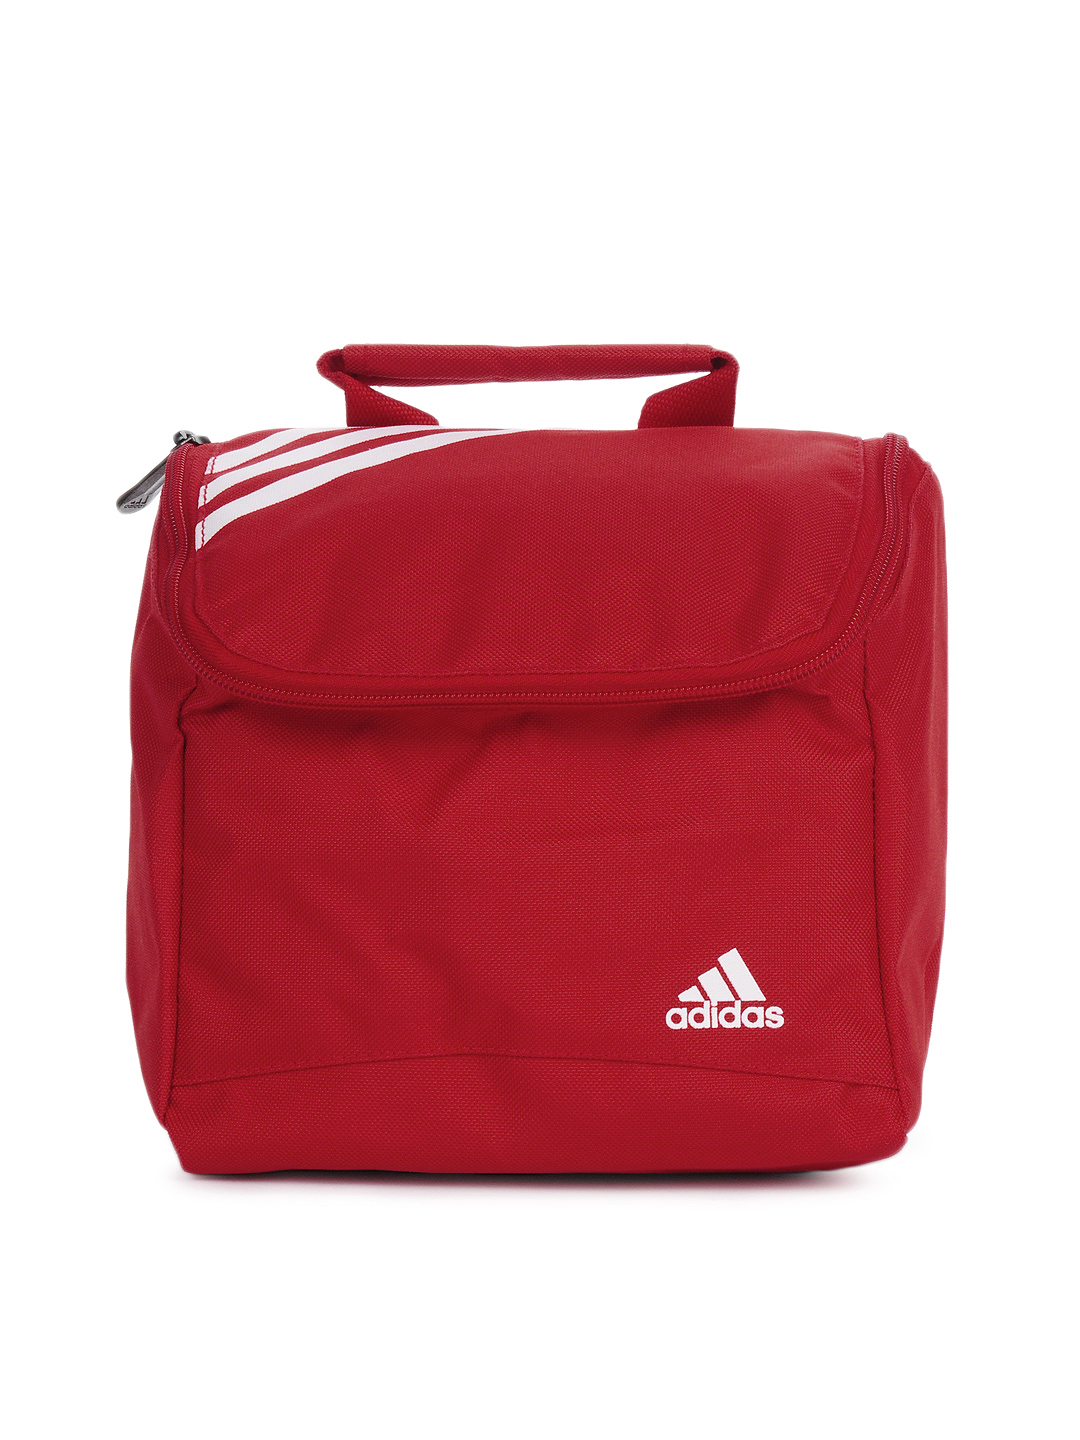 adidas bags red